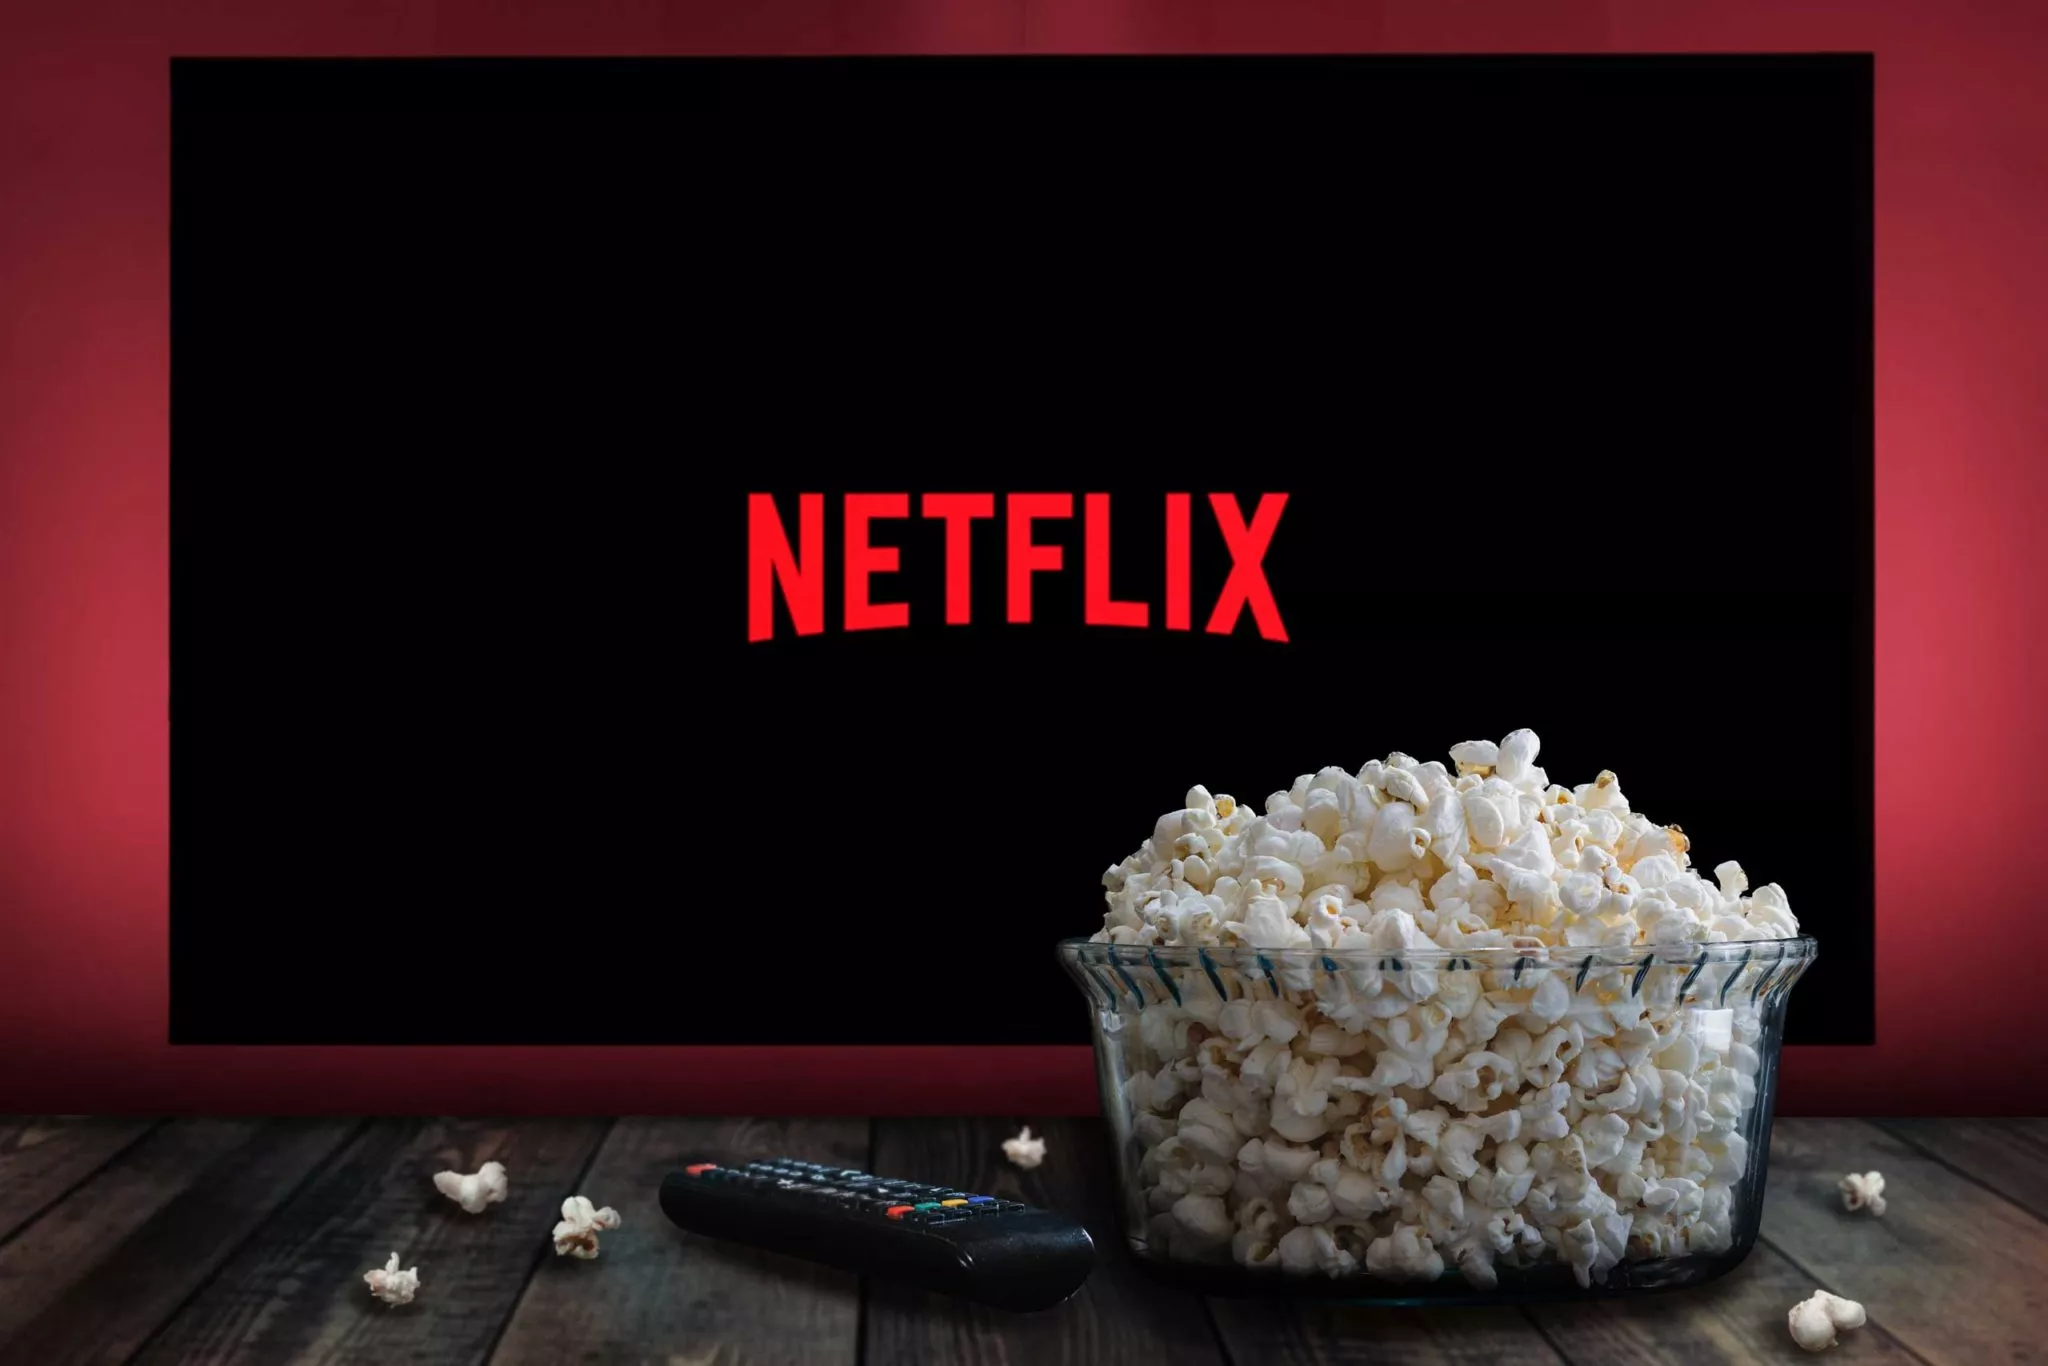 Bowl of popcorn in front of TV screen showing Netflix logo